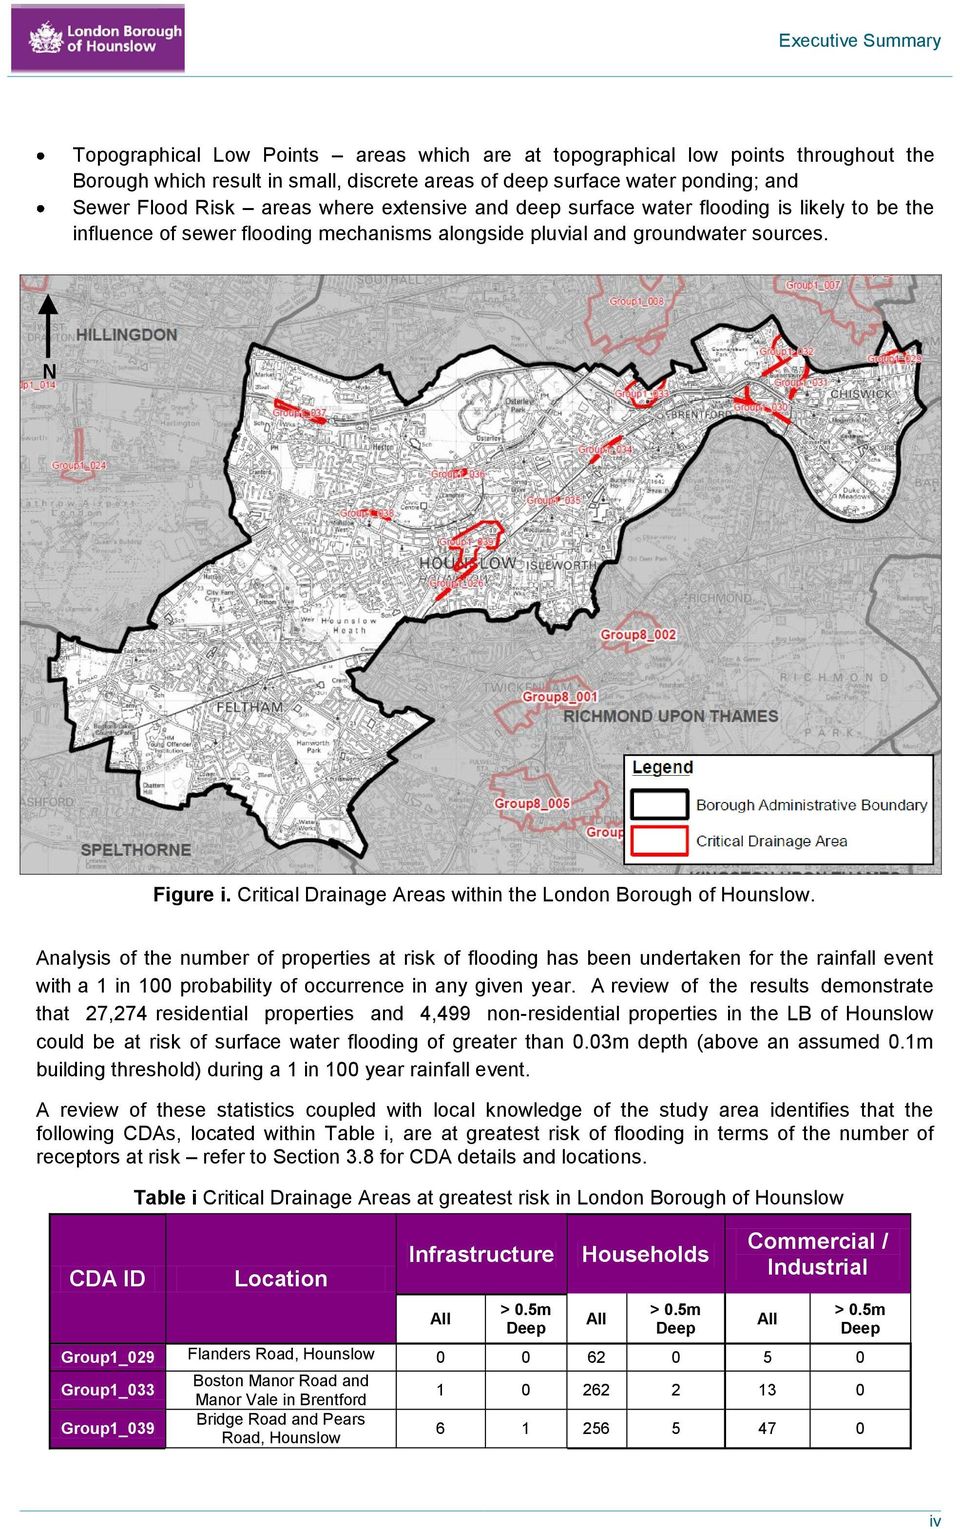 Critical Drainage Areas within the London Borough of Hounslow.